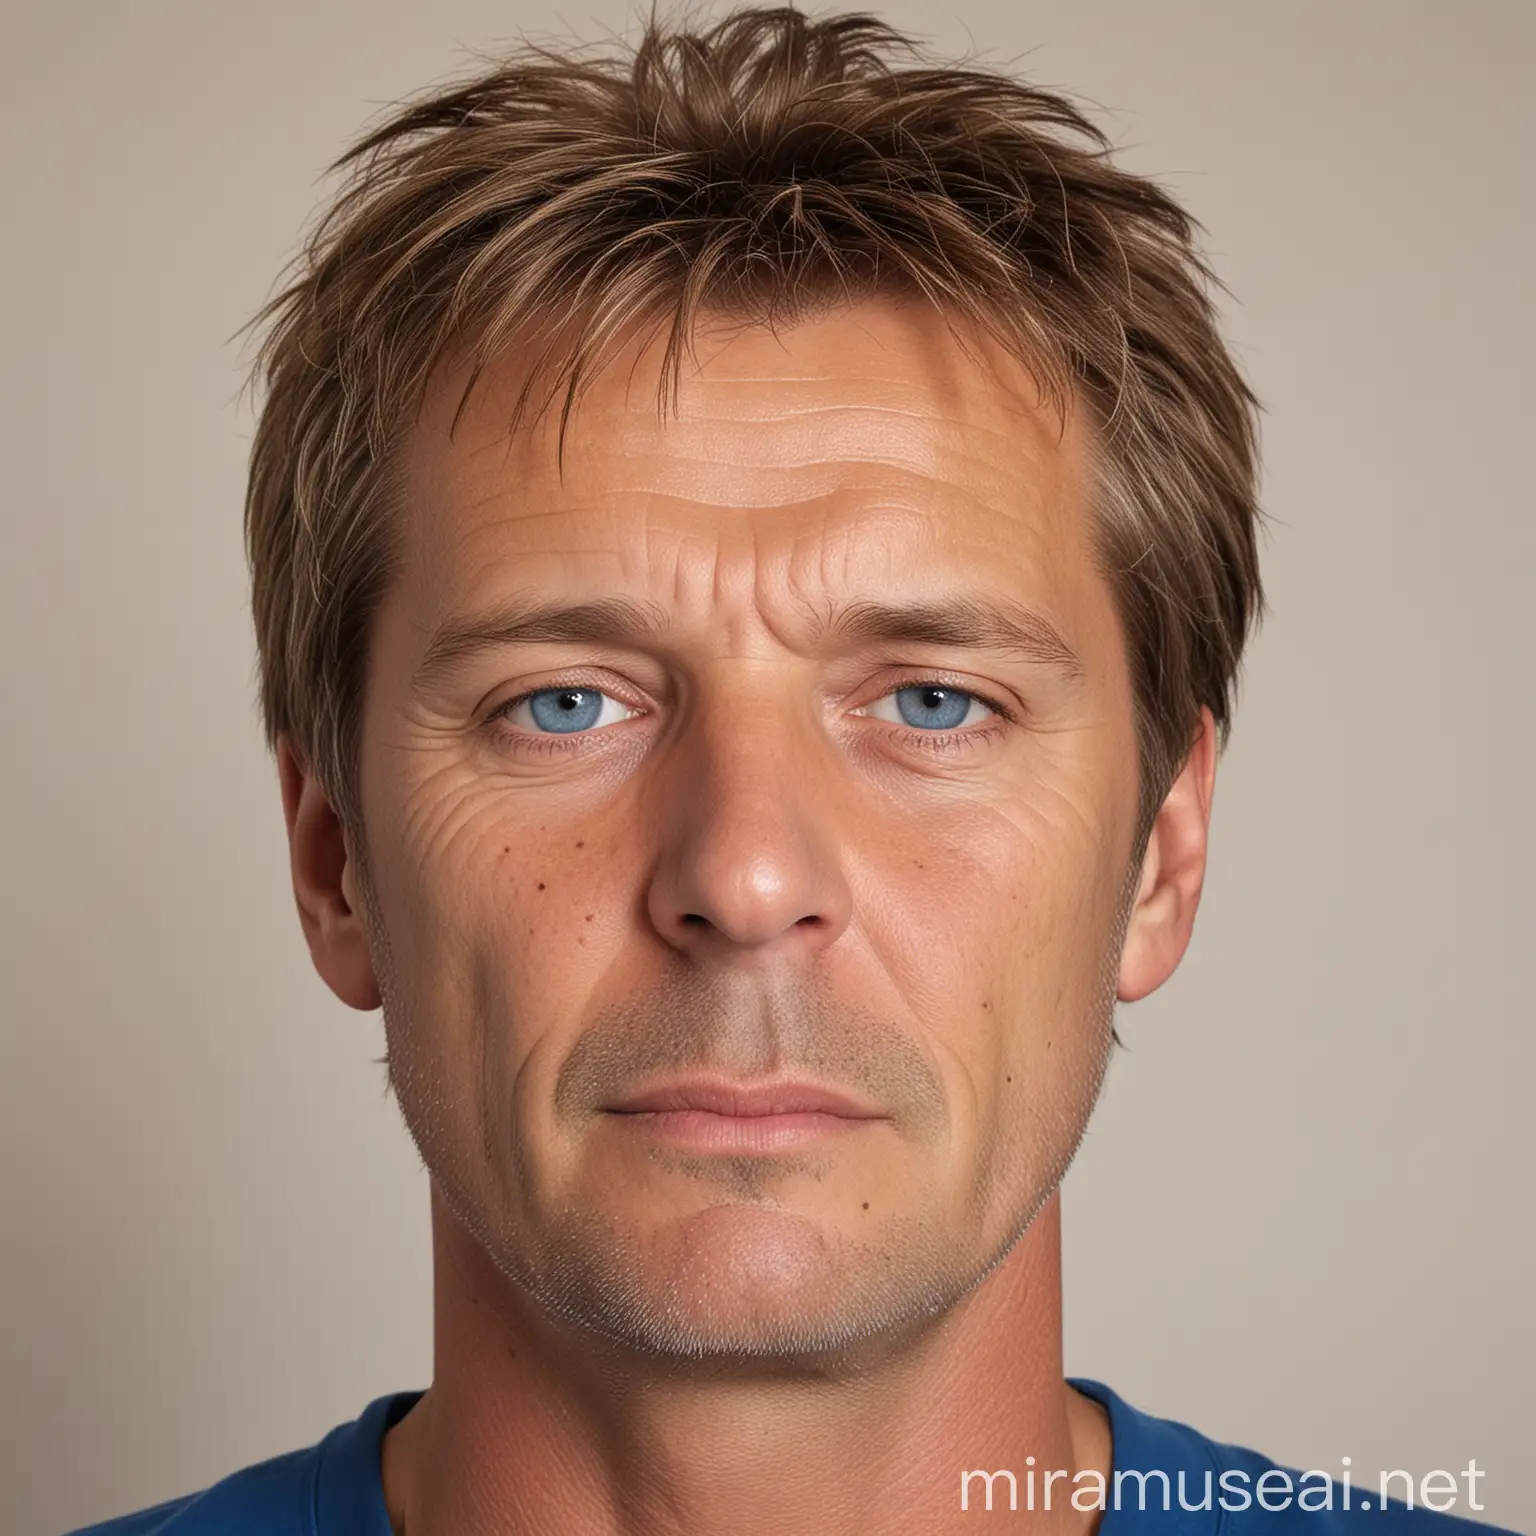 Mature Man with Short Light Brown Hair in Blue TShirt